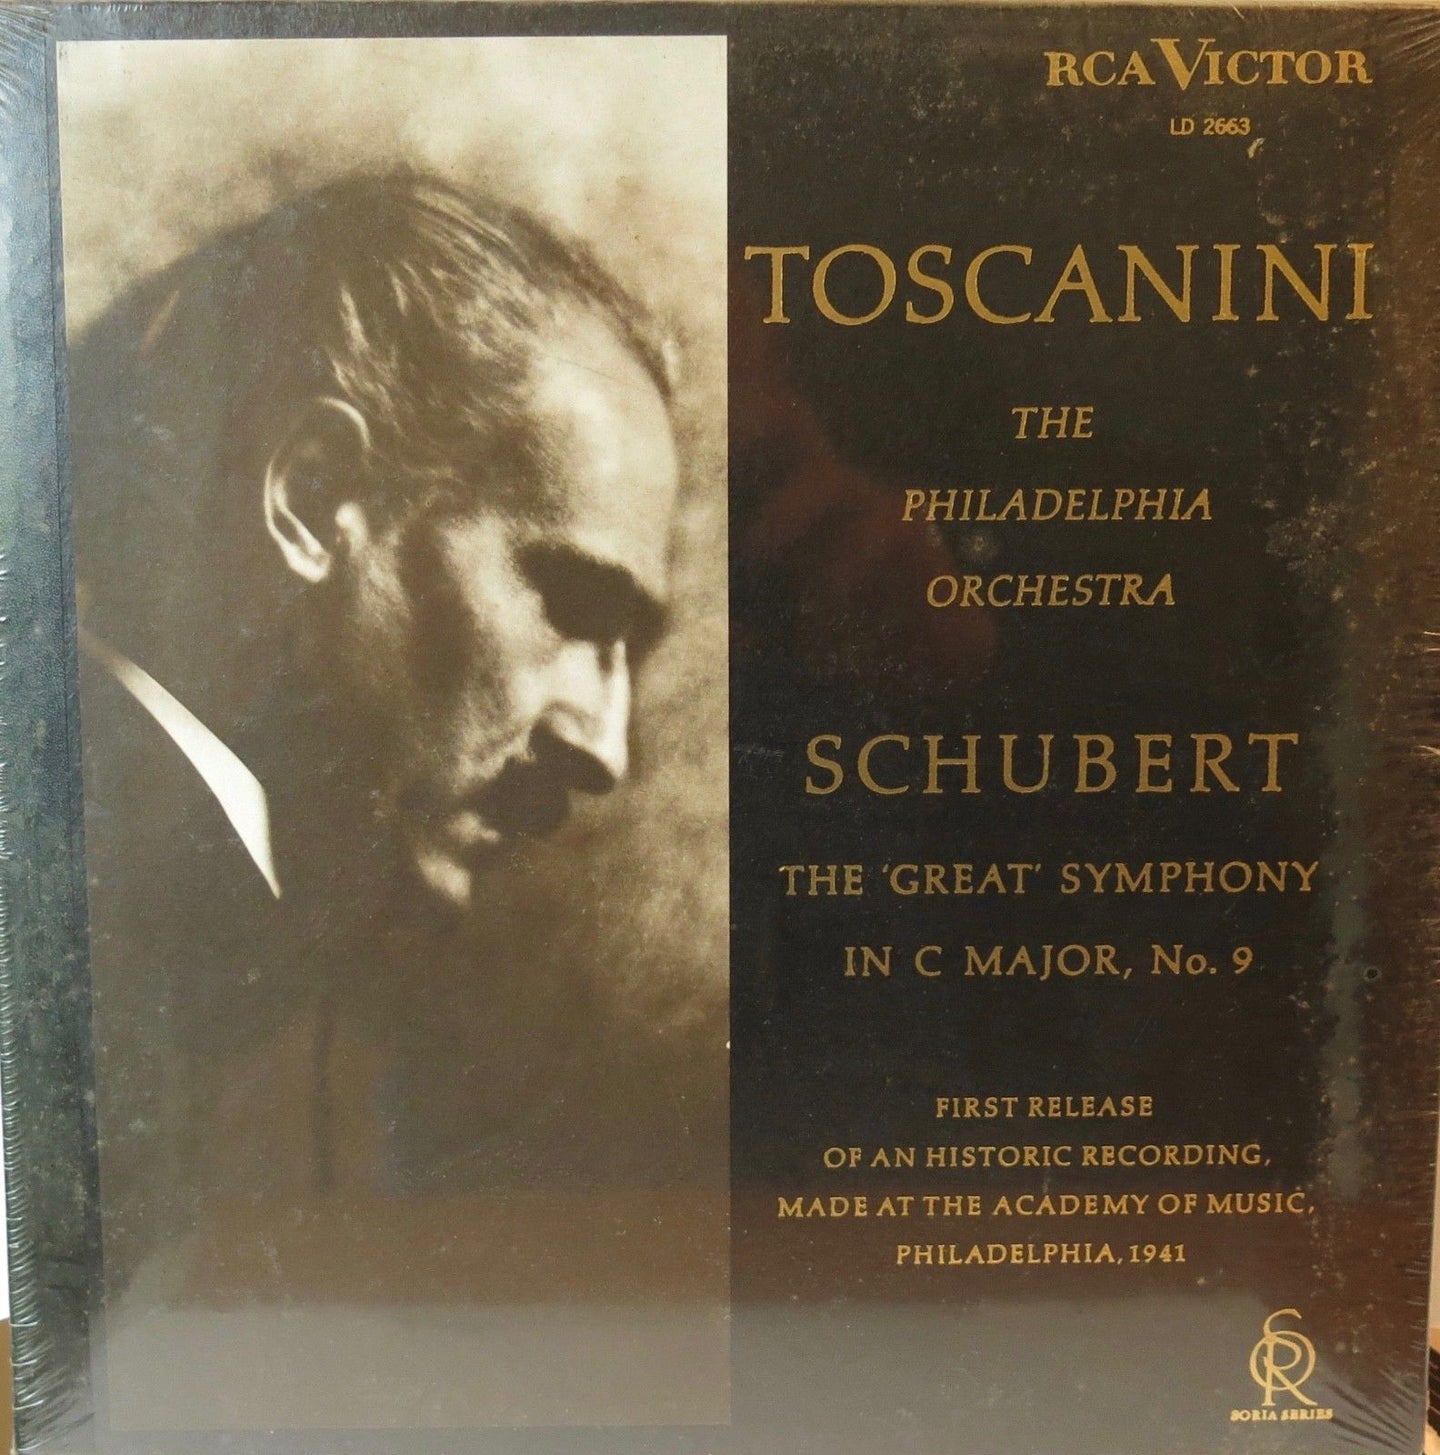 Schubert the Great Symphony in C Major No 9 Toscanini - RCA Victor